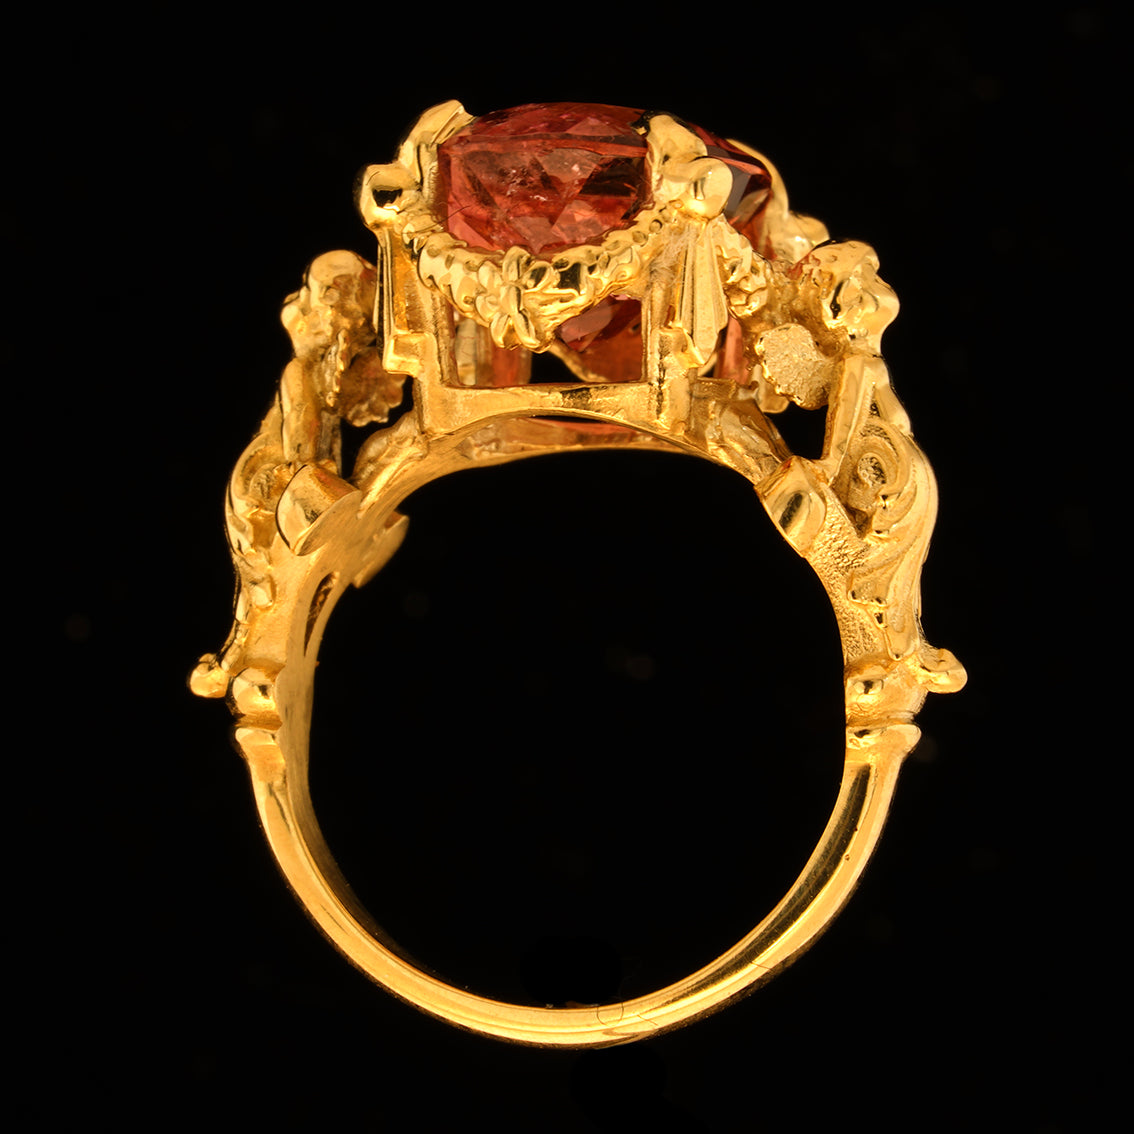 SARAPH'S HAVEN RING